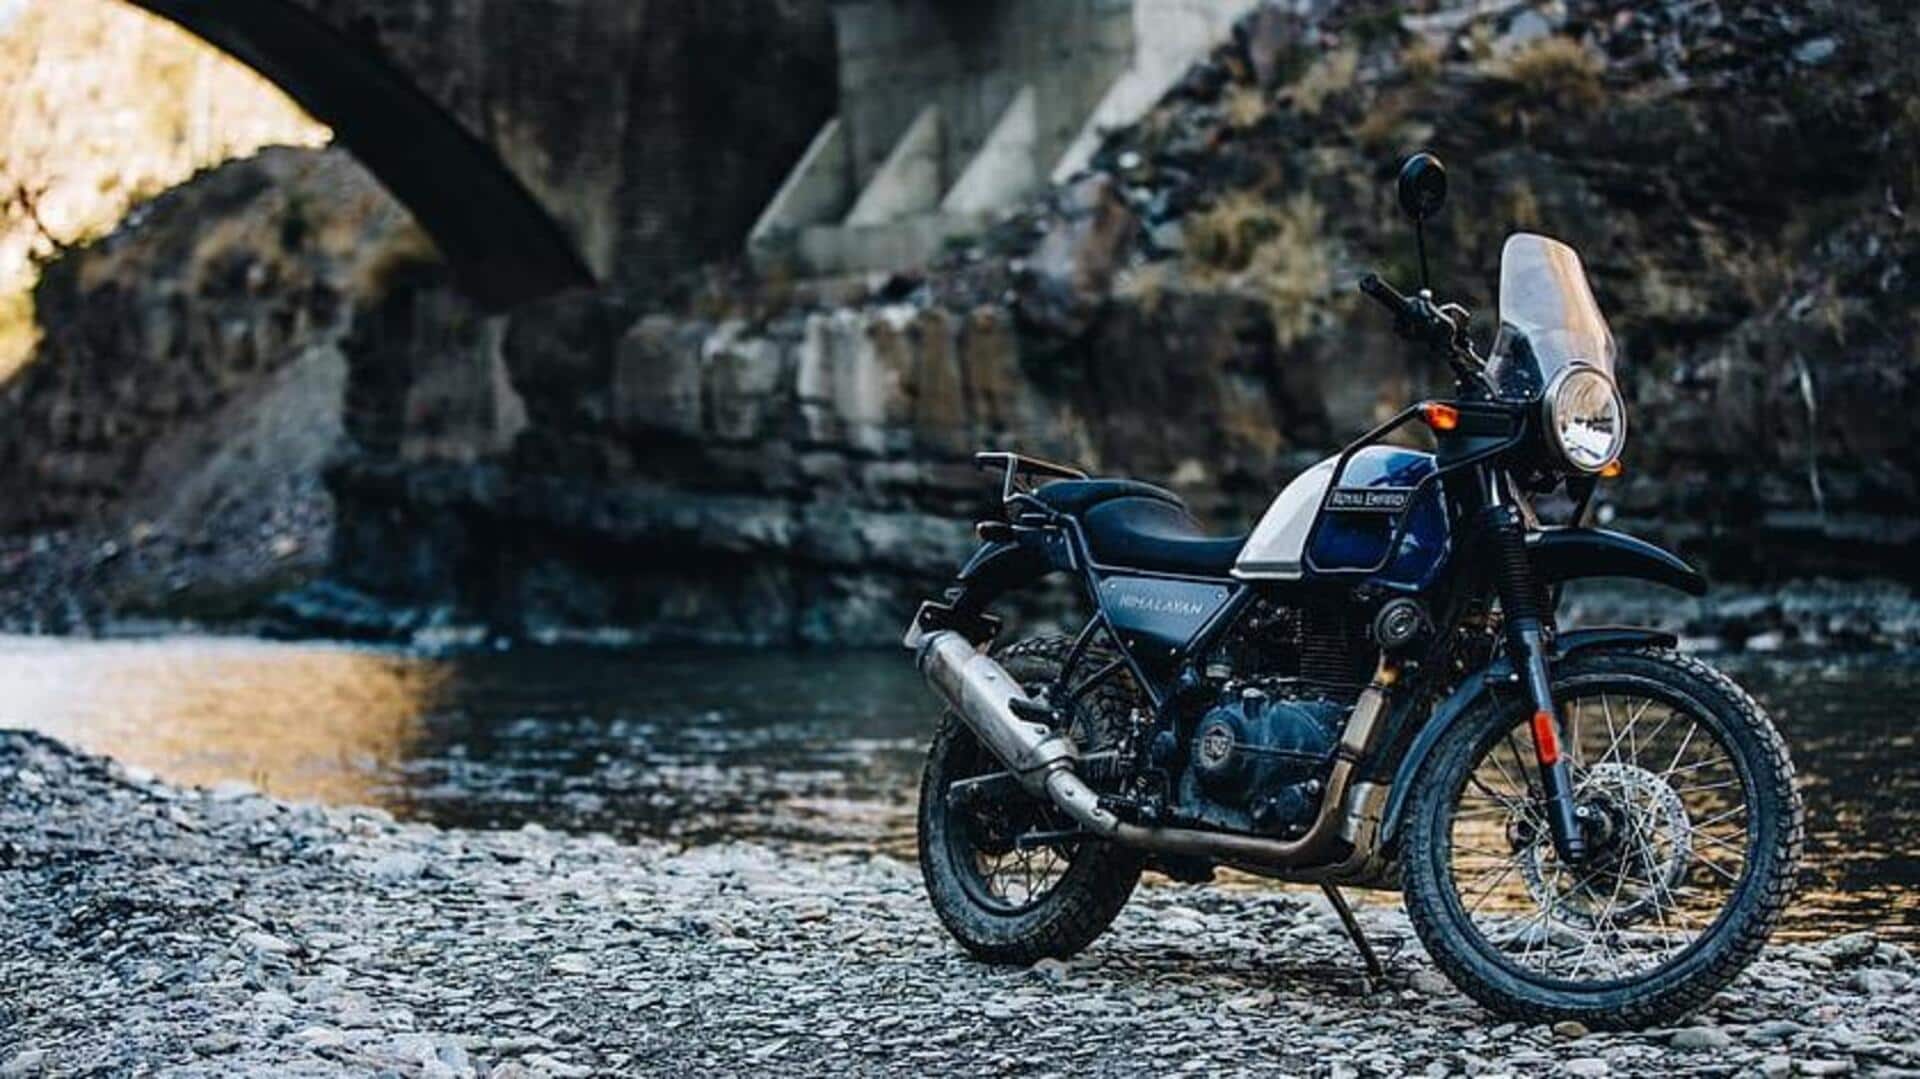 2023 Royal Enfield Himalayan 450 revealed ahead of launch